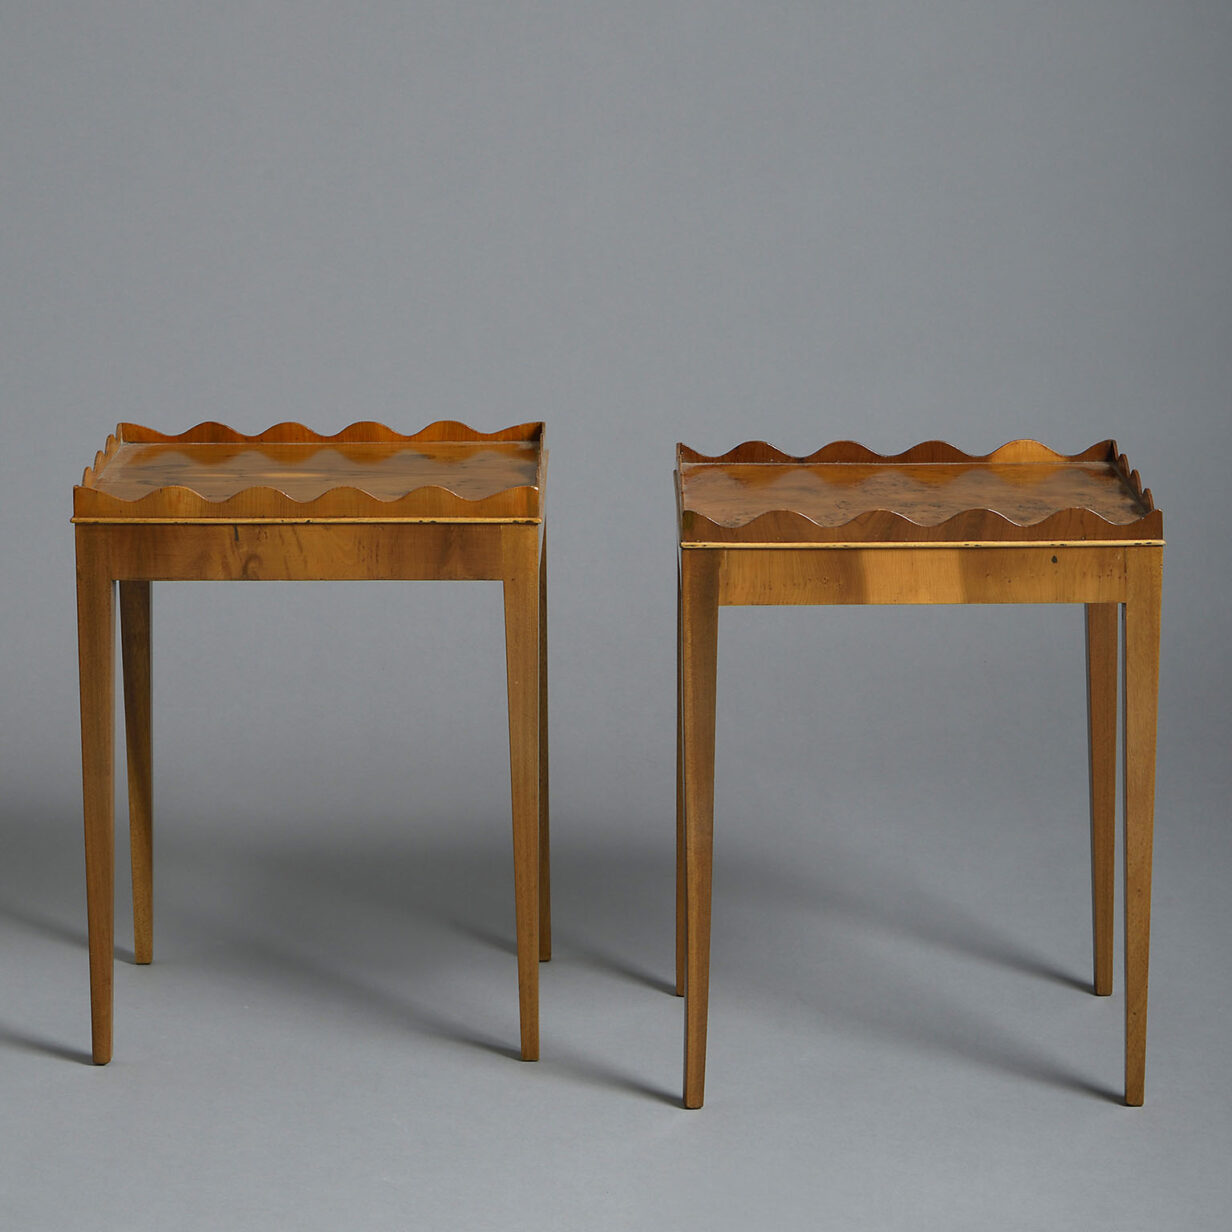 Pair of burr yew wood end tables in the george iii manner